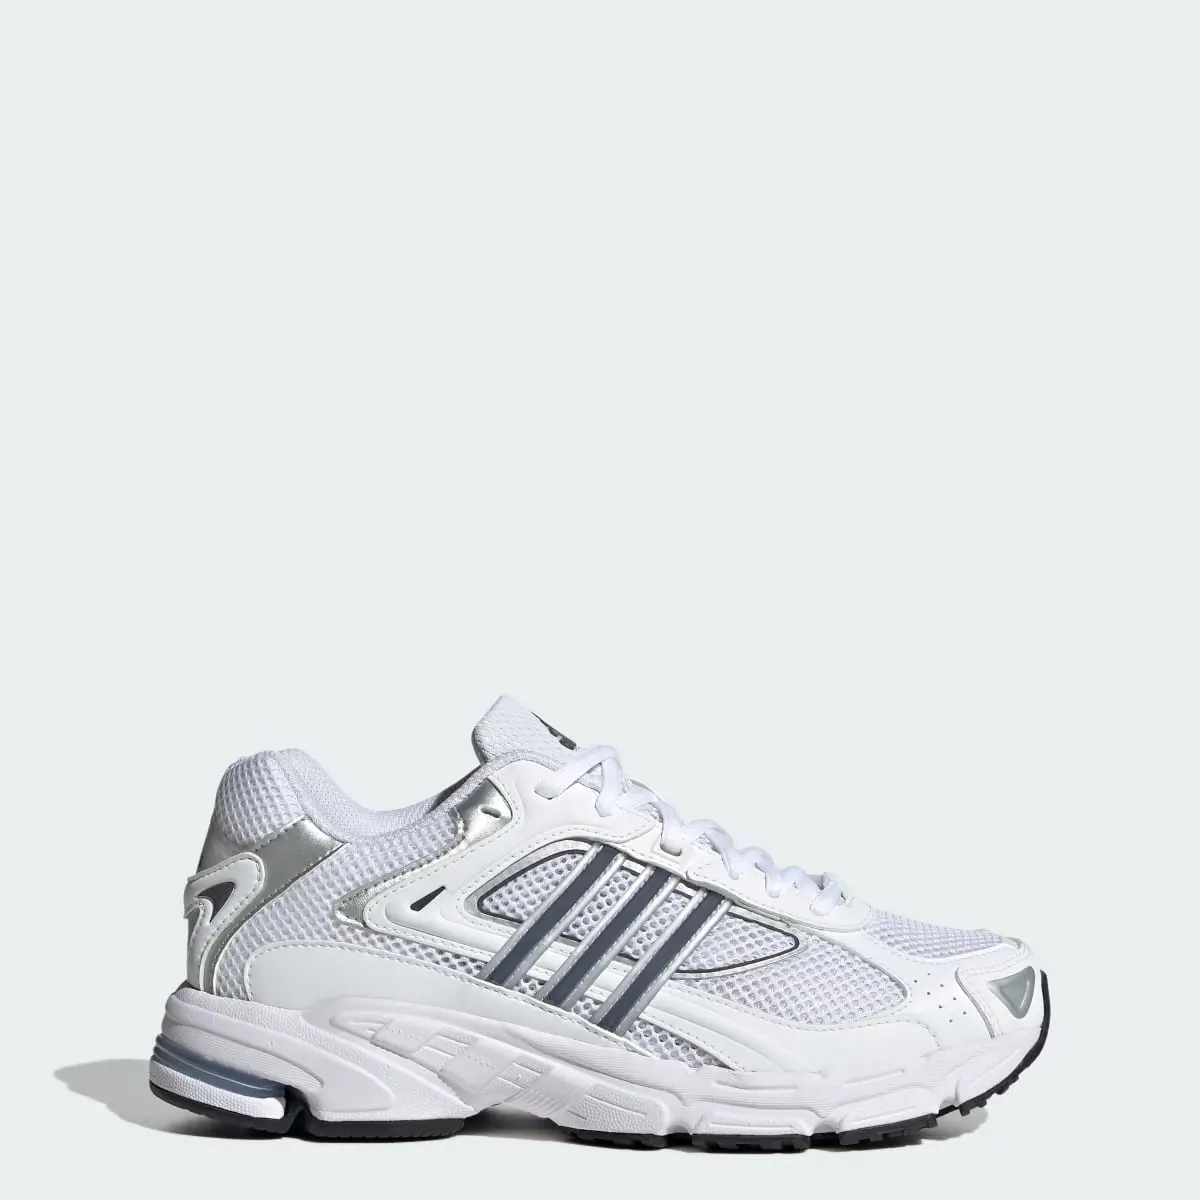 Adidas Response CL Shoes. 1